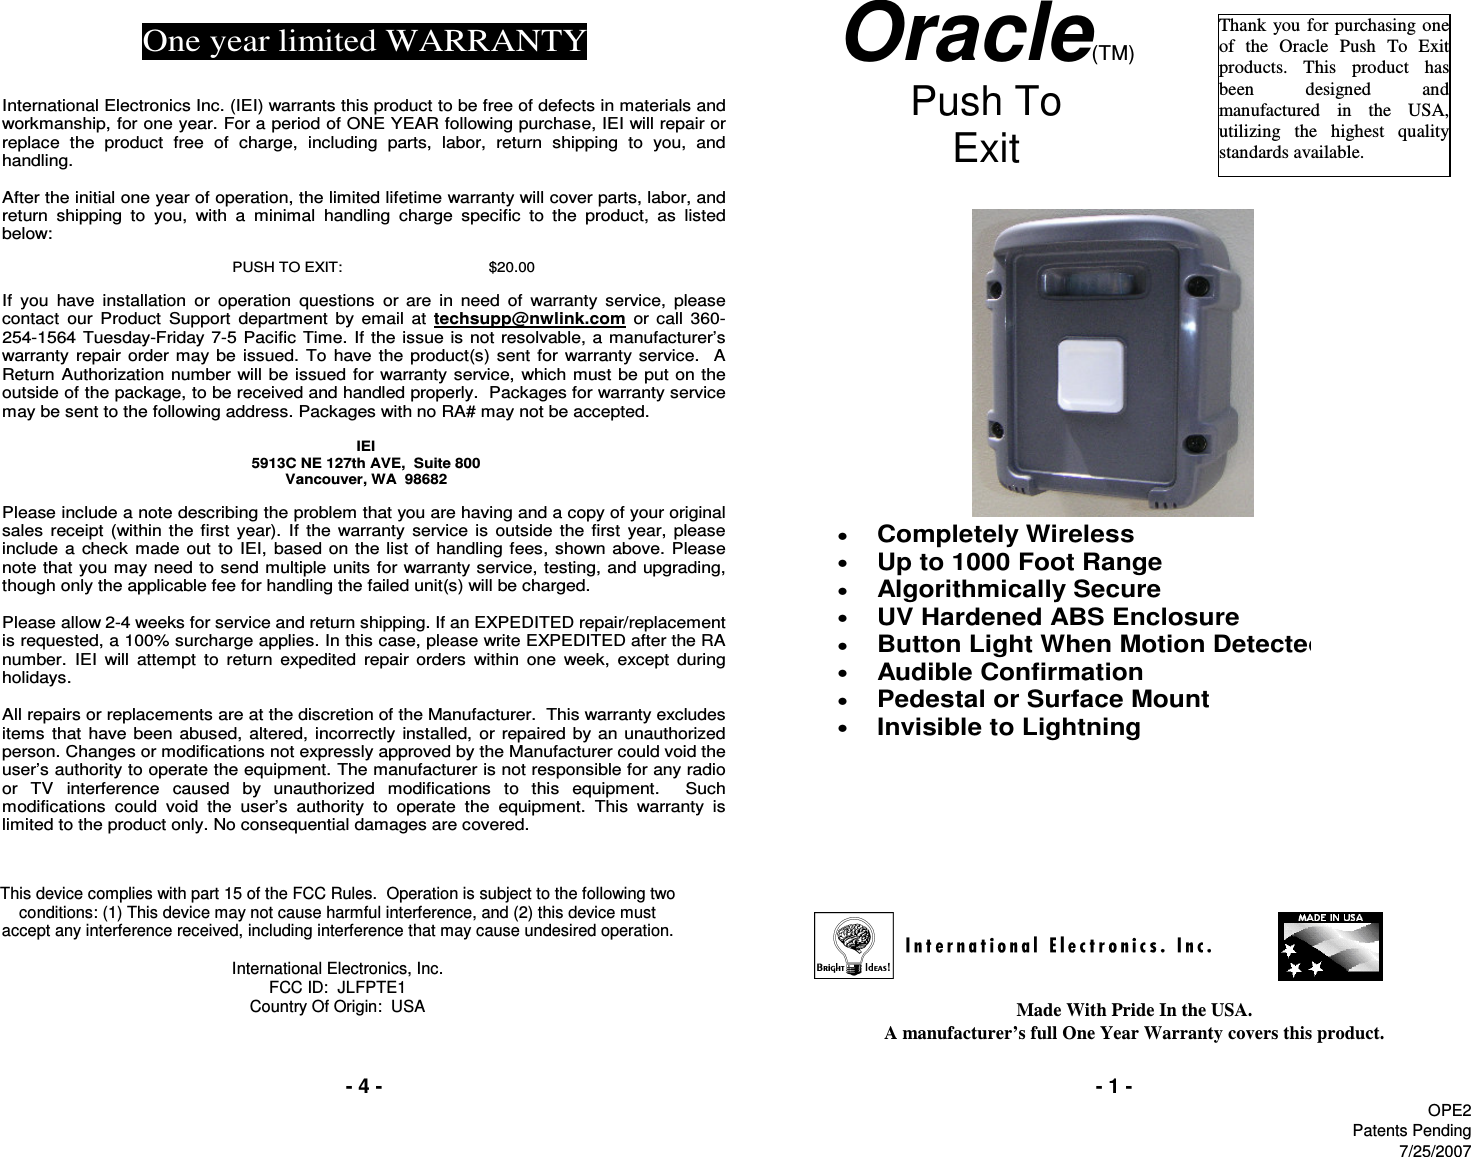 - 4 -Made With Pride In the USA.                                                                                                                                               A manufacturer’s full One Year Warranty covers this product.- 1 -Oracle(TM) Push To  Exit    Thank  you for  purchasing  one of  the  Oracle  Push  To  Exit products.  This  product  has been  designed  and manufactured  in  the  USA, utilizing  the  highest  quality standards available. One year limited WARRANTY   International Electronics Inc. (IEI) warrants this product to be free of defects in materials and workmanship, for one year. For a period of ONE YEAR following purchase, IEI will repair or replace  the  product  free  of  charge,  including  parts,  labor,  return  shipping  to  you,  and handling.   After the initial one year of operation, the limited lifetime warranty will cover parts, labor, and return  shipping  to  you,  with  a  minimal  handling  charge  specific  to  the  product,  as  listed below:  PUSH TO EXIT:   $20.00  If  you  have  installation  or  operation  questions  or  are  in  need  of  warranty  service,  please contact  our  Product  Support  department  by email  at  techsupp@nwlink.com  or  call  360-254-1564 Tuesday-Friday 7-5 Pacific  Time. If the issue  is not resolvable, a manufacturer’s warranty  repair order may be  issued. To have the product(s) sent for warranty service.    A Return Authorization number will be issued  for warranty service,  which must  be put on the outside of the package, to be received and handled properly.  Packages for warranty service may be sent to the following address. Packages with no RA# may not be accepted.  IEI 5913C NE 127th AVE,  Suite 800 Vancouver, WA  98682   Please include a note describing the problem that you are having and a copy of your original sales  receipt  (within  the  first  year).  If  the  warranty  service  is  outside  the  first  year,  please include a check  made  out  to  IEI,  based on the list of handling  fees, shown above. Please note that you may need to send multiple units for warranty service, testing, and upgrading, though only the applicable fee for handling the failed unit(s) will be charged.   Please allow 2-4 weeks for service and return shipping. If an EXPEDITED repair/replacement is requested, a 100% surcharge applies. In this case, please write EXPEDITED after the RA number.  IEI  will  attempt  to  return  expedited  repair  orders  within  one  week,  except  during holidays.  All repairs or replacements are at the discretion of the Manufacturer.  This warranty excludes items  that  have been abused,  altered, incorrectly installed, or  repaired  by an unauthorized person. Changes or modifications not expressly approved by the Manufacturer could void the user’s authority to operate the equipment. The manufacturer is not responsible for any radio or  TV  interference  caused  by  unauthorized  modifications  to  this  equipment.    Such modifications  could  void  the  user’s  authority  to  operate  the  equipment.  This  warranty  is limited to the product only. No consequential damages are covered. This device complies with part 15 of the FCC Rules.  Operation is subject to the following two conditions: (1) This device may not cause harmful interference, and (2) this device must accept any interference received, including interference that may cause undesired operation.  International Electronics, Inc. FCC ID:  JLFPTE1 Country Of Origin:  USA •  Completely Wireless  •  Up to 1000 Foot Range •  Algorithmically Secure  •  UV Hardened ABS Enclosure  •  Button Light When Motion Detected  •  Audible Confirmation  •  Pedestal or Surface Mount  •  Invisible to Lightning     OPE2Patents Pending7/25/2007